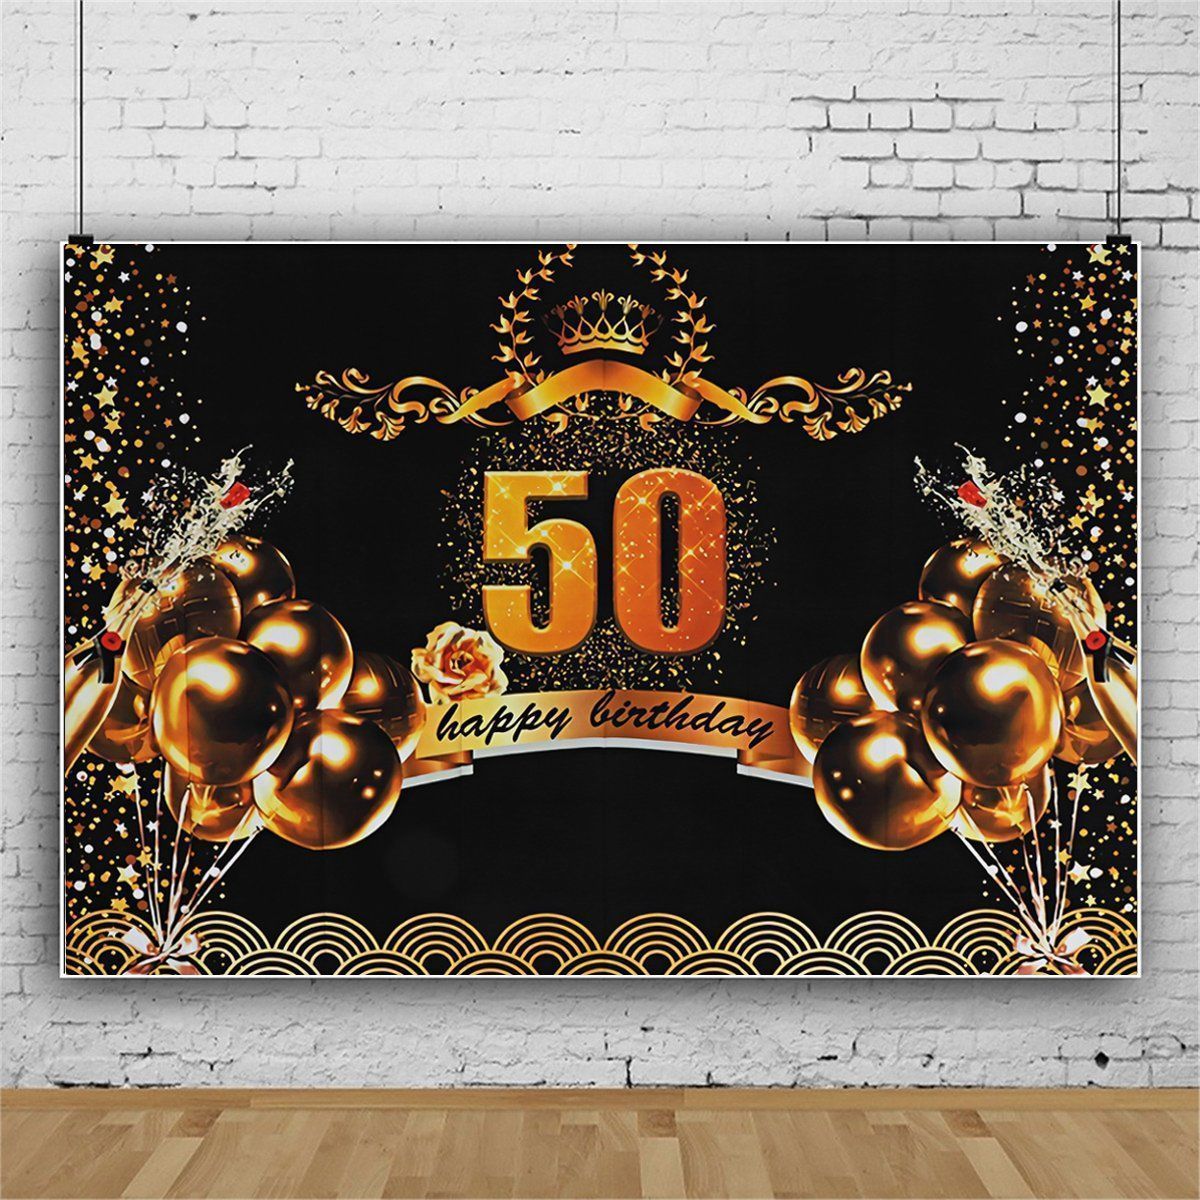 7x5FT-40506070-Birthday-Party-Decoration-Anniversary-Studio-Photography-Backdrops-Background-1680247